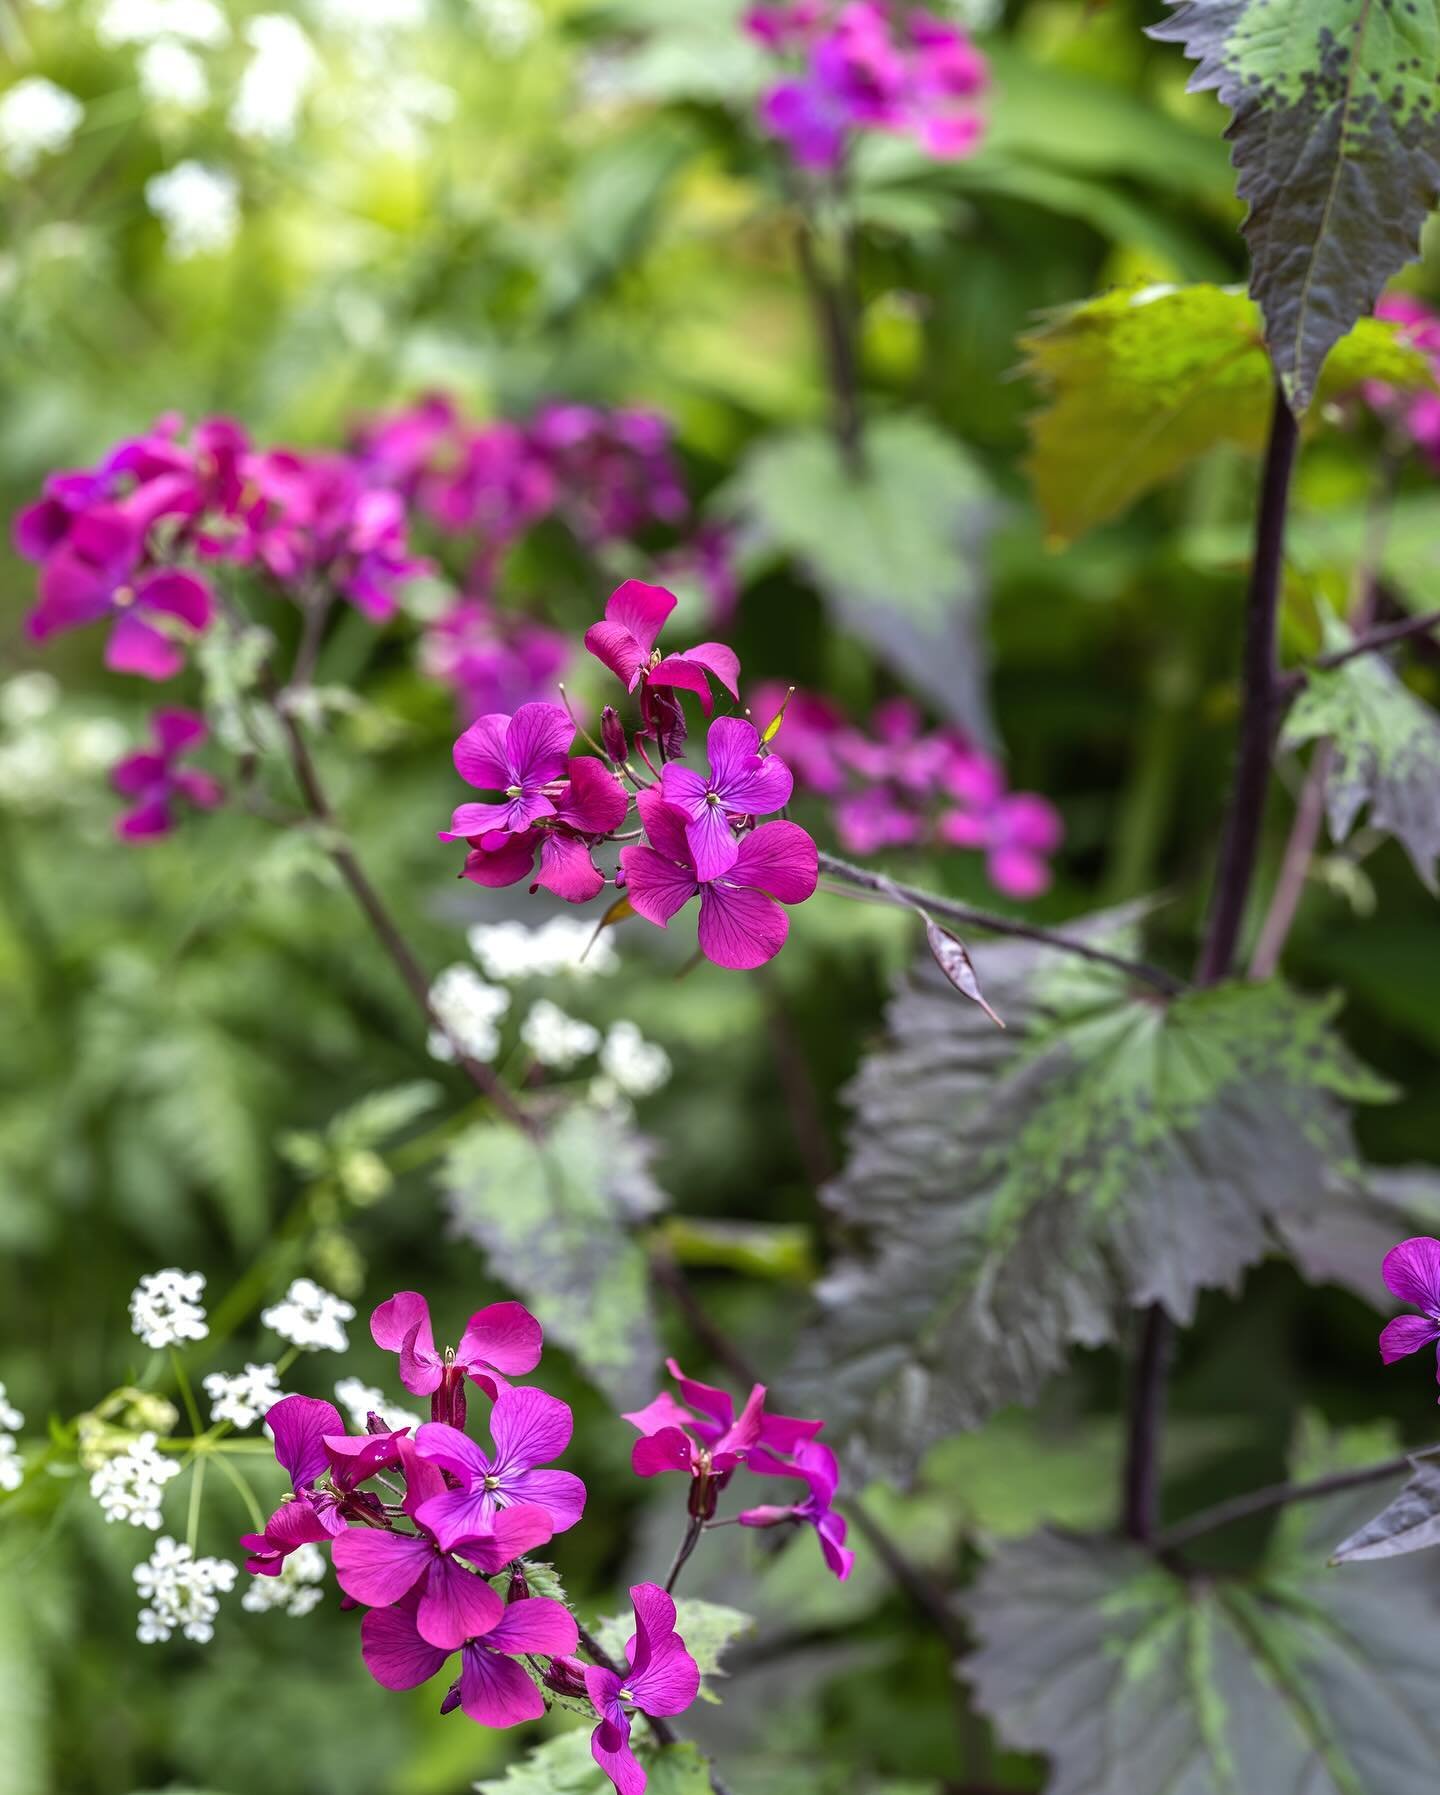 Dreamy border with pink-purple Honesty (Lunaria annua &lsquo;Chedglow&rsquo;) and cow parsley 💜
.
.
.
.
#springborder #honestyplant #lunariaannua #cowparsley #gardenborder #gardenphotography #gardeninspiration #cottagegarden #englishgarden #flowerph